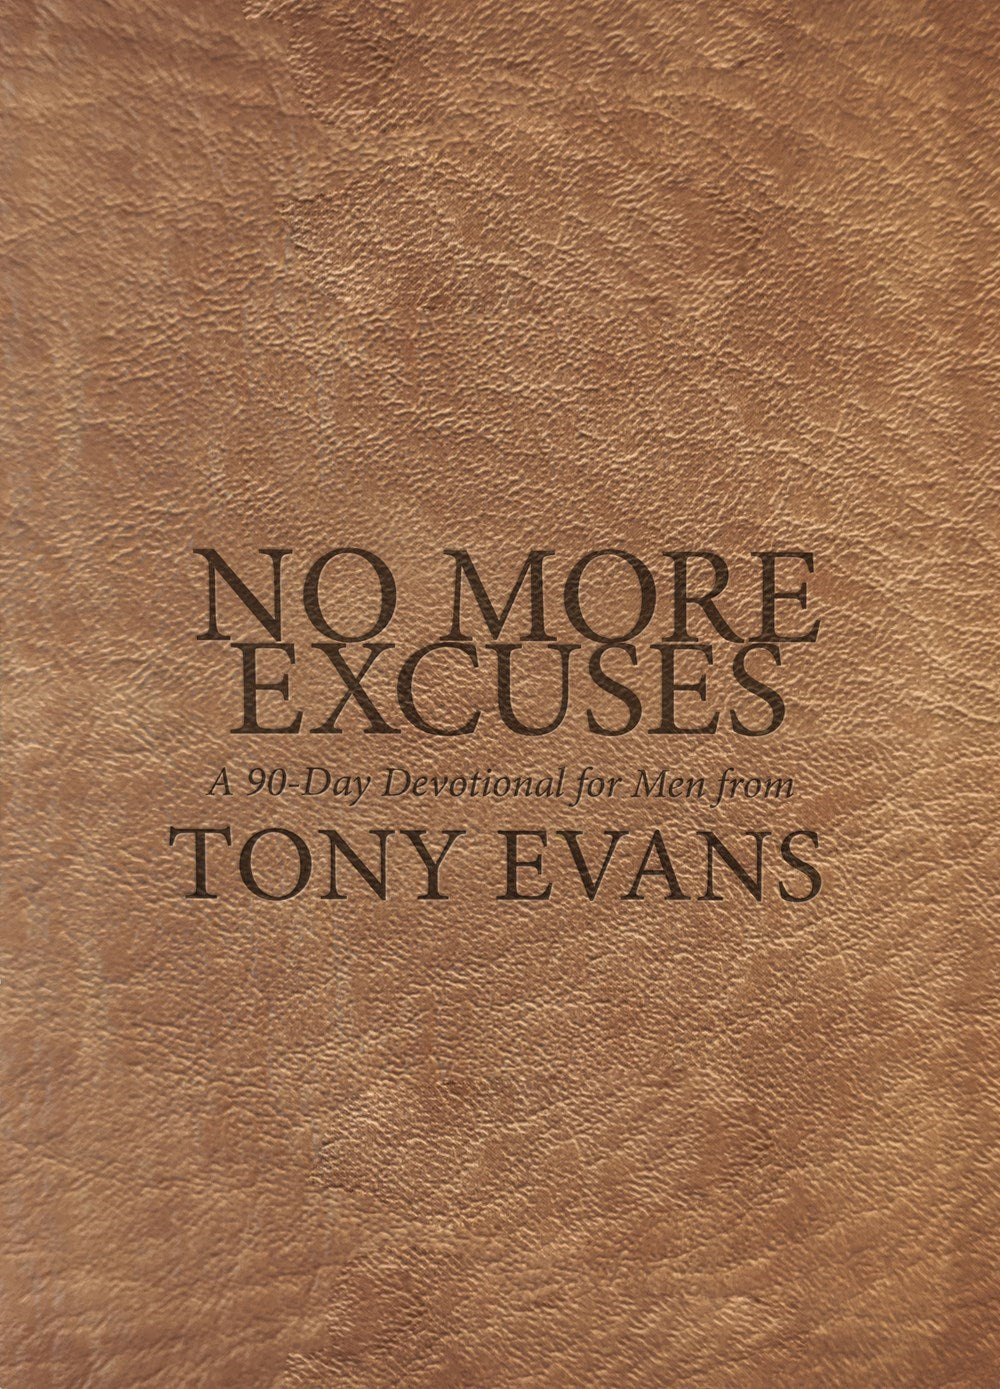 Seed of Abraham Christian Bookstore - Tony Evans - No More Excuses: A 90-Day Devotional For Men